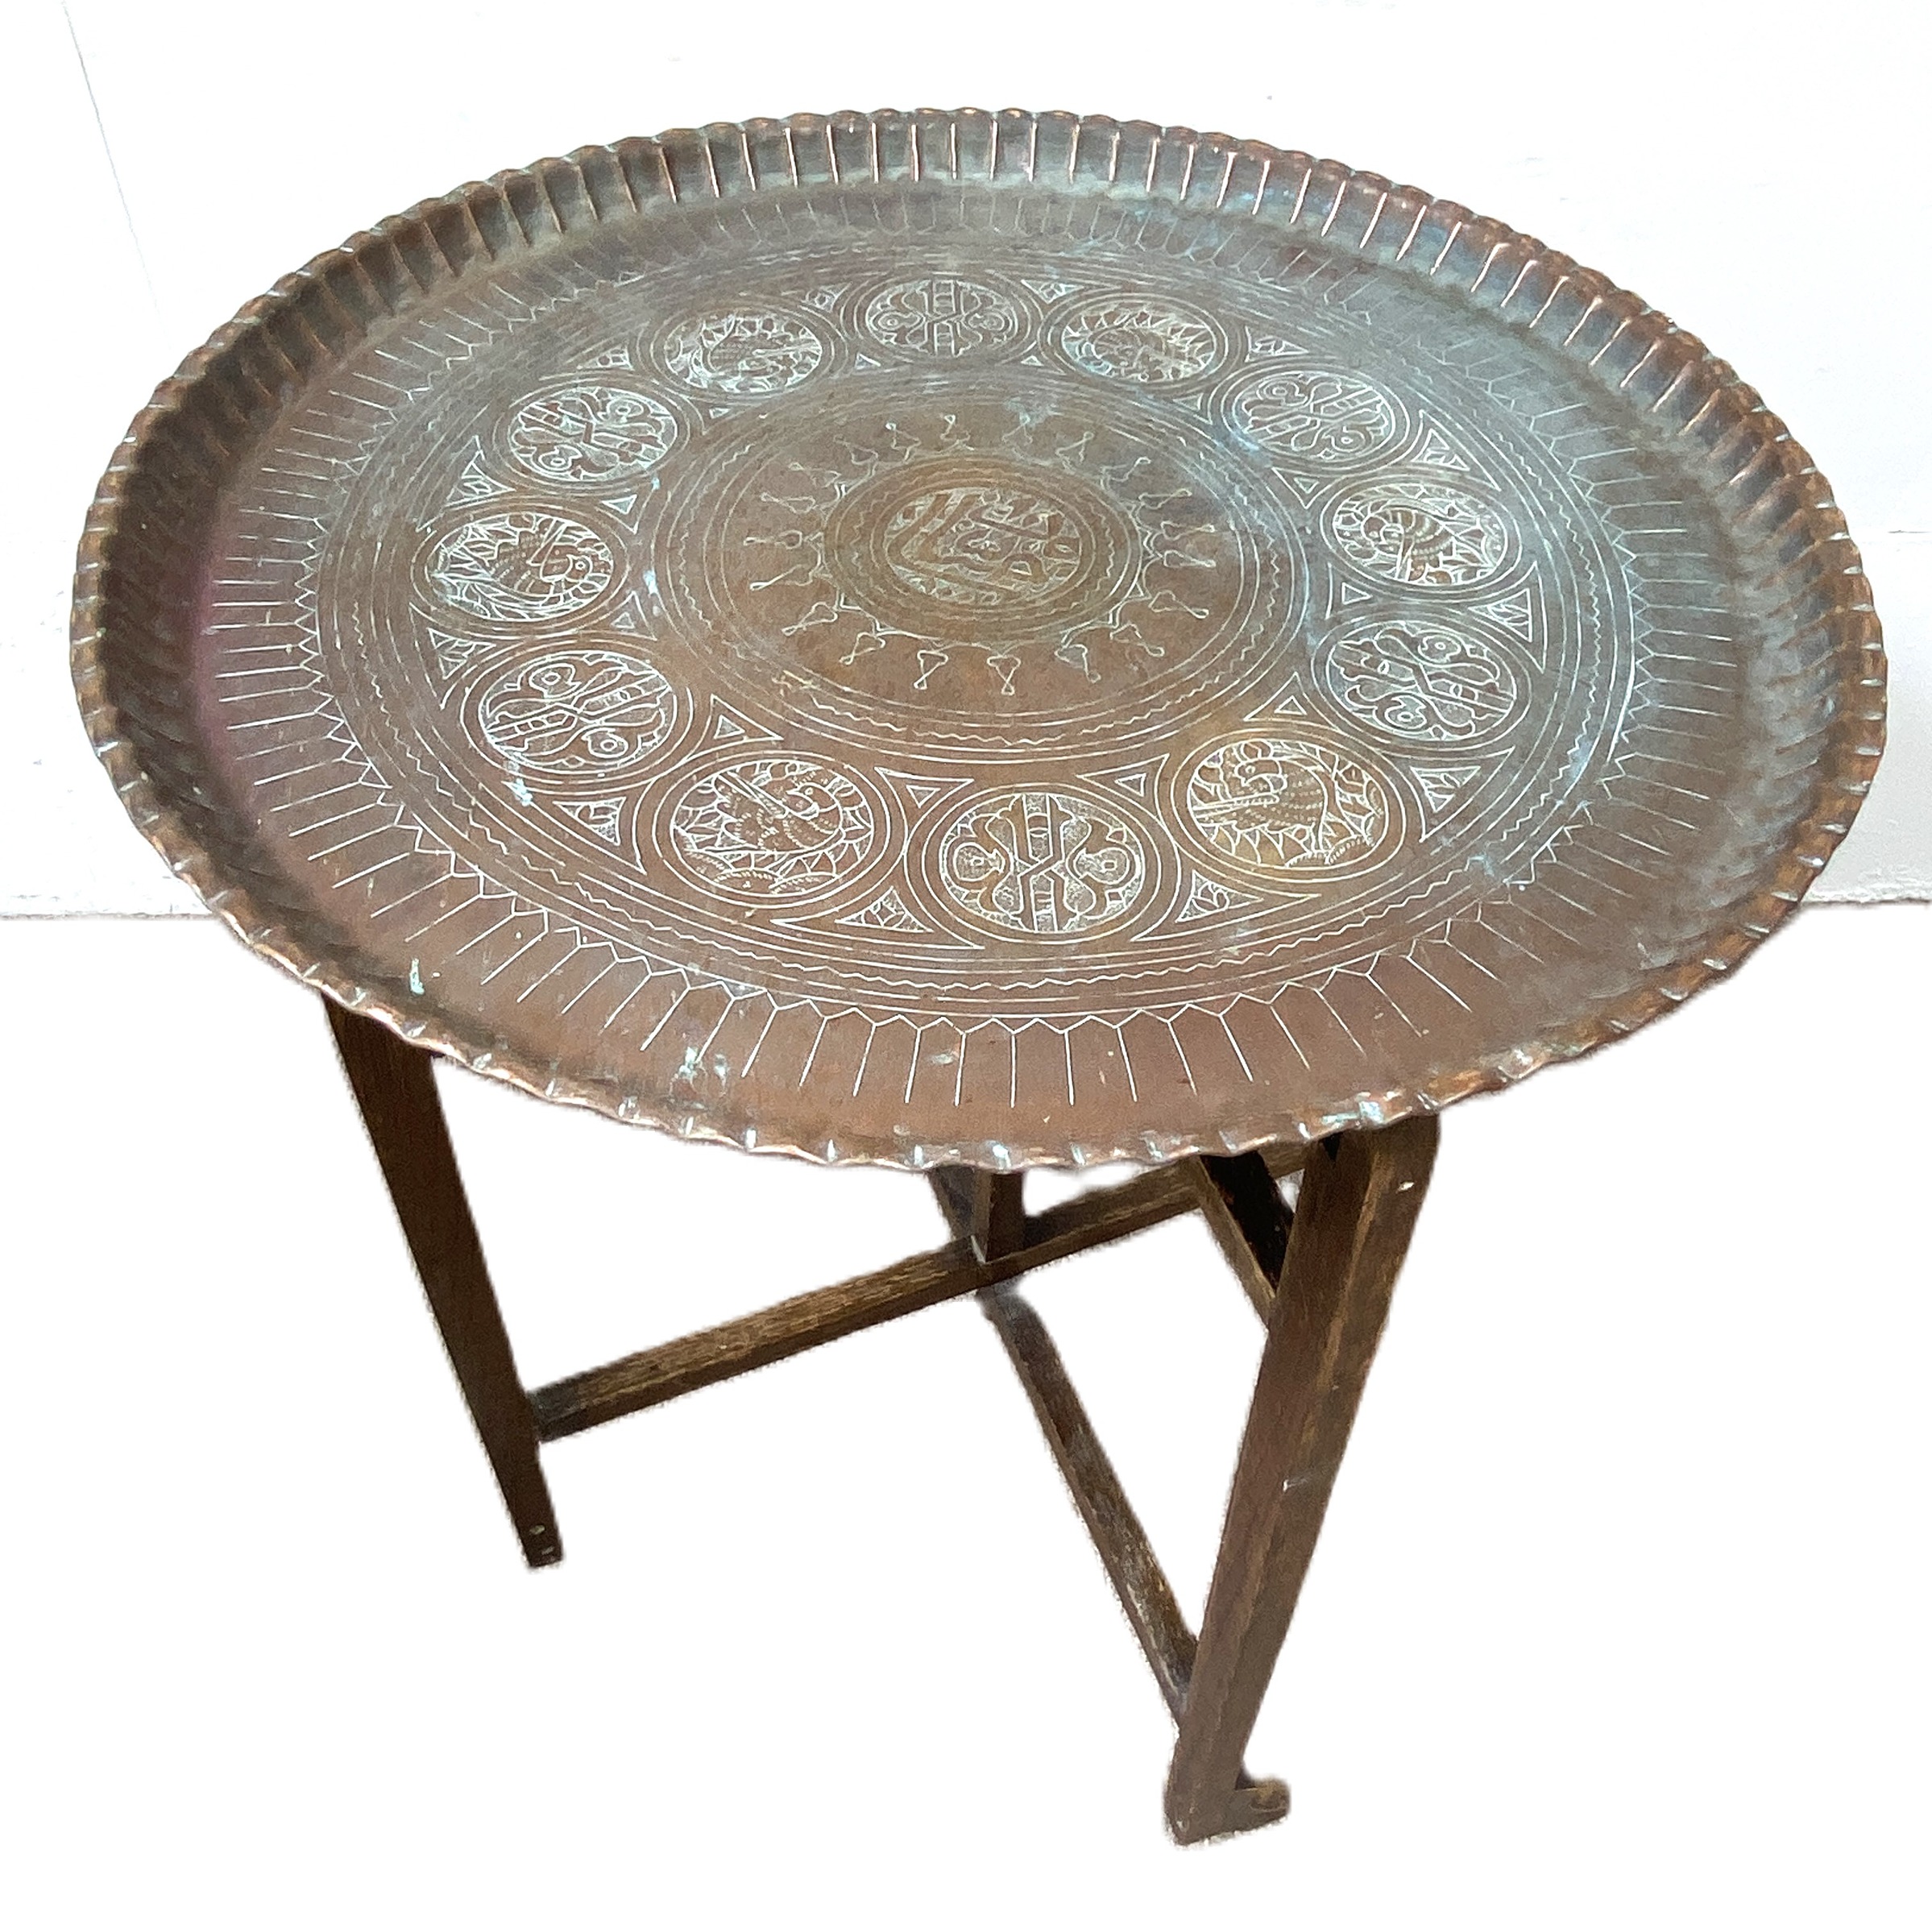 An embossed Islamic copper tray and associated folding stand, 72cm diameter; also a group of baskets - Image 2 of 4